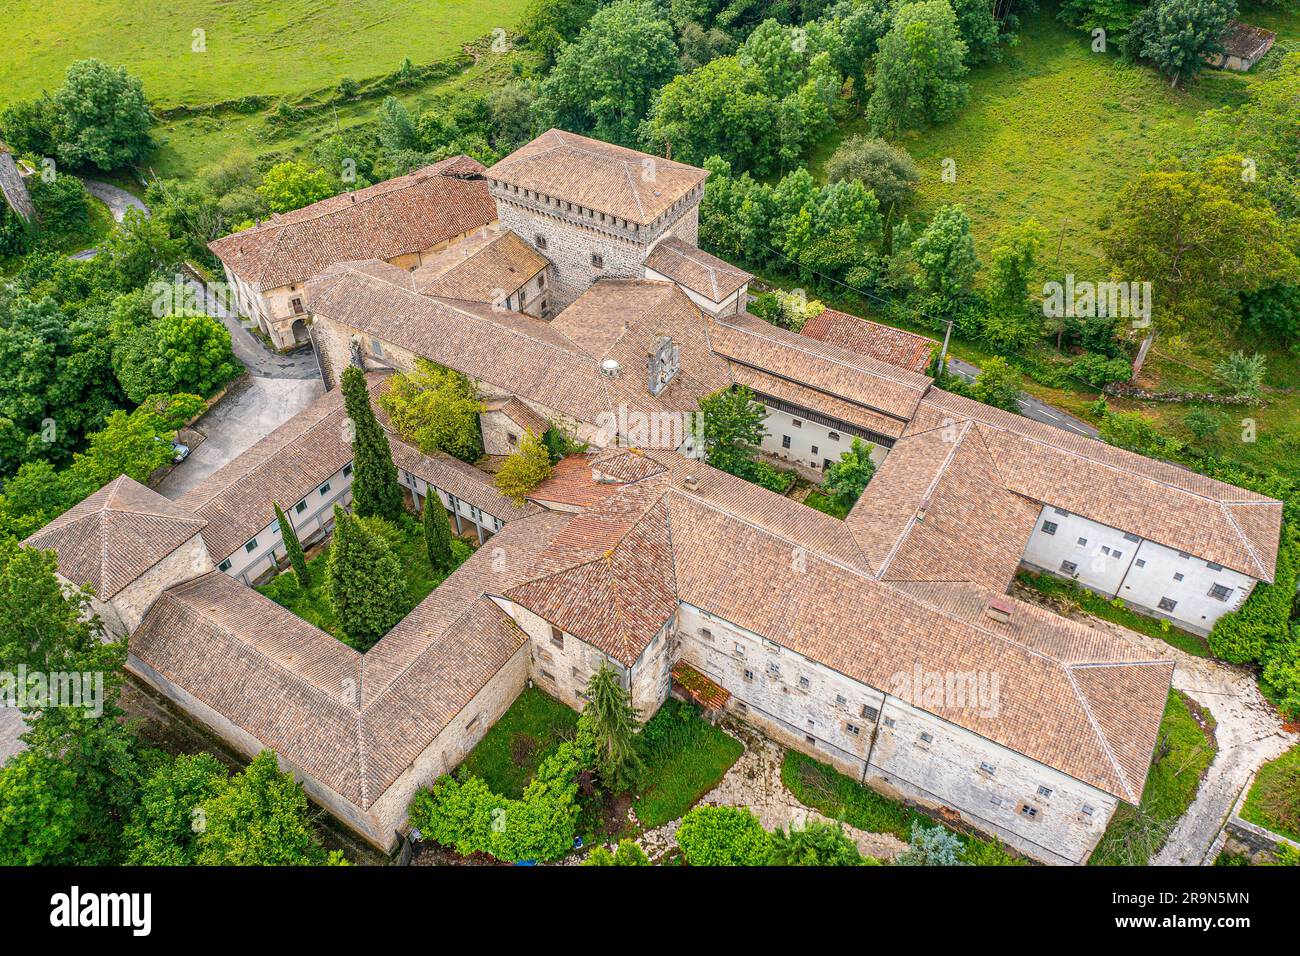 The Quejana Complex of Historical Monument. Ayala Palace. Overview. Set in a convent, church and chapel. Basque Country, Spain Stock Photo